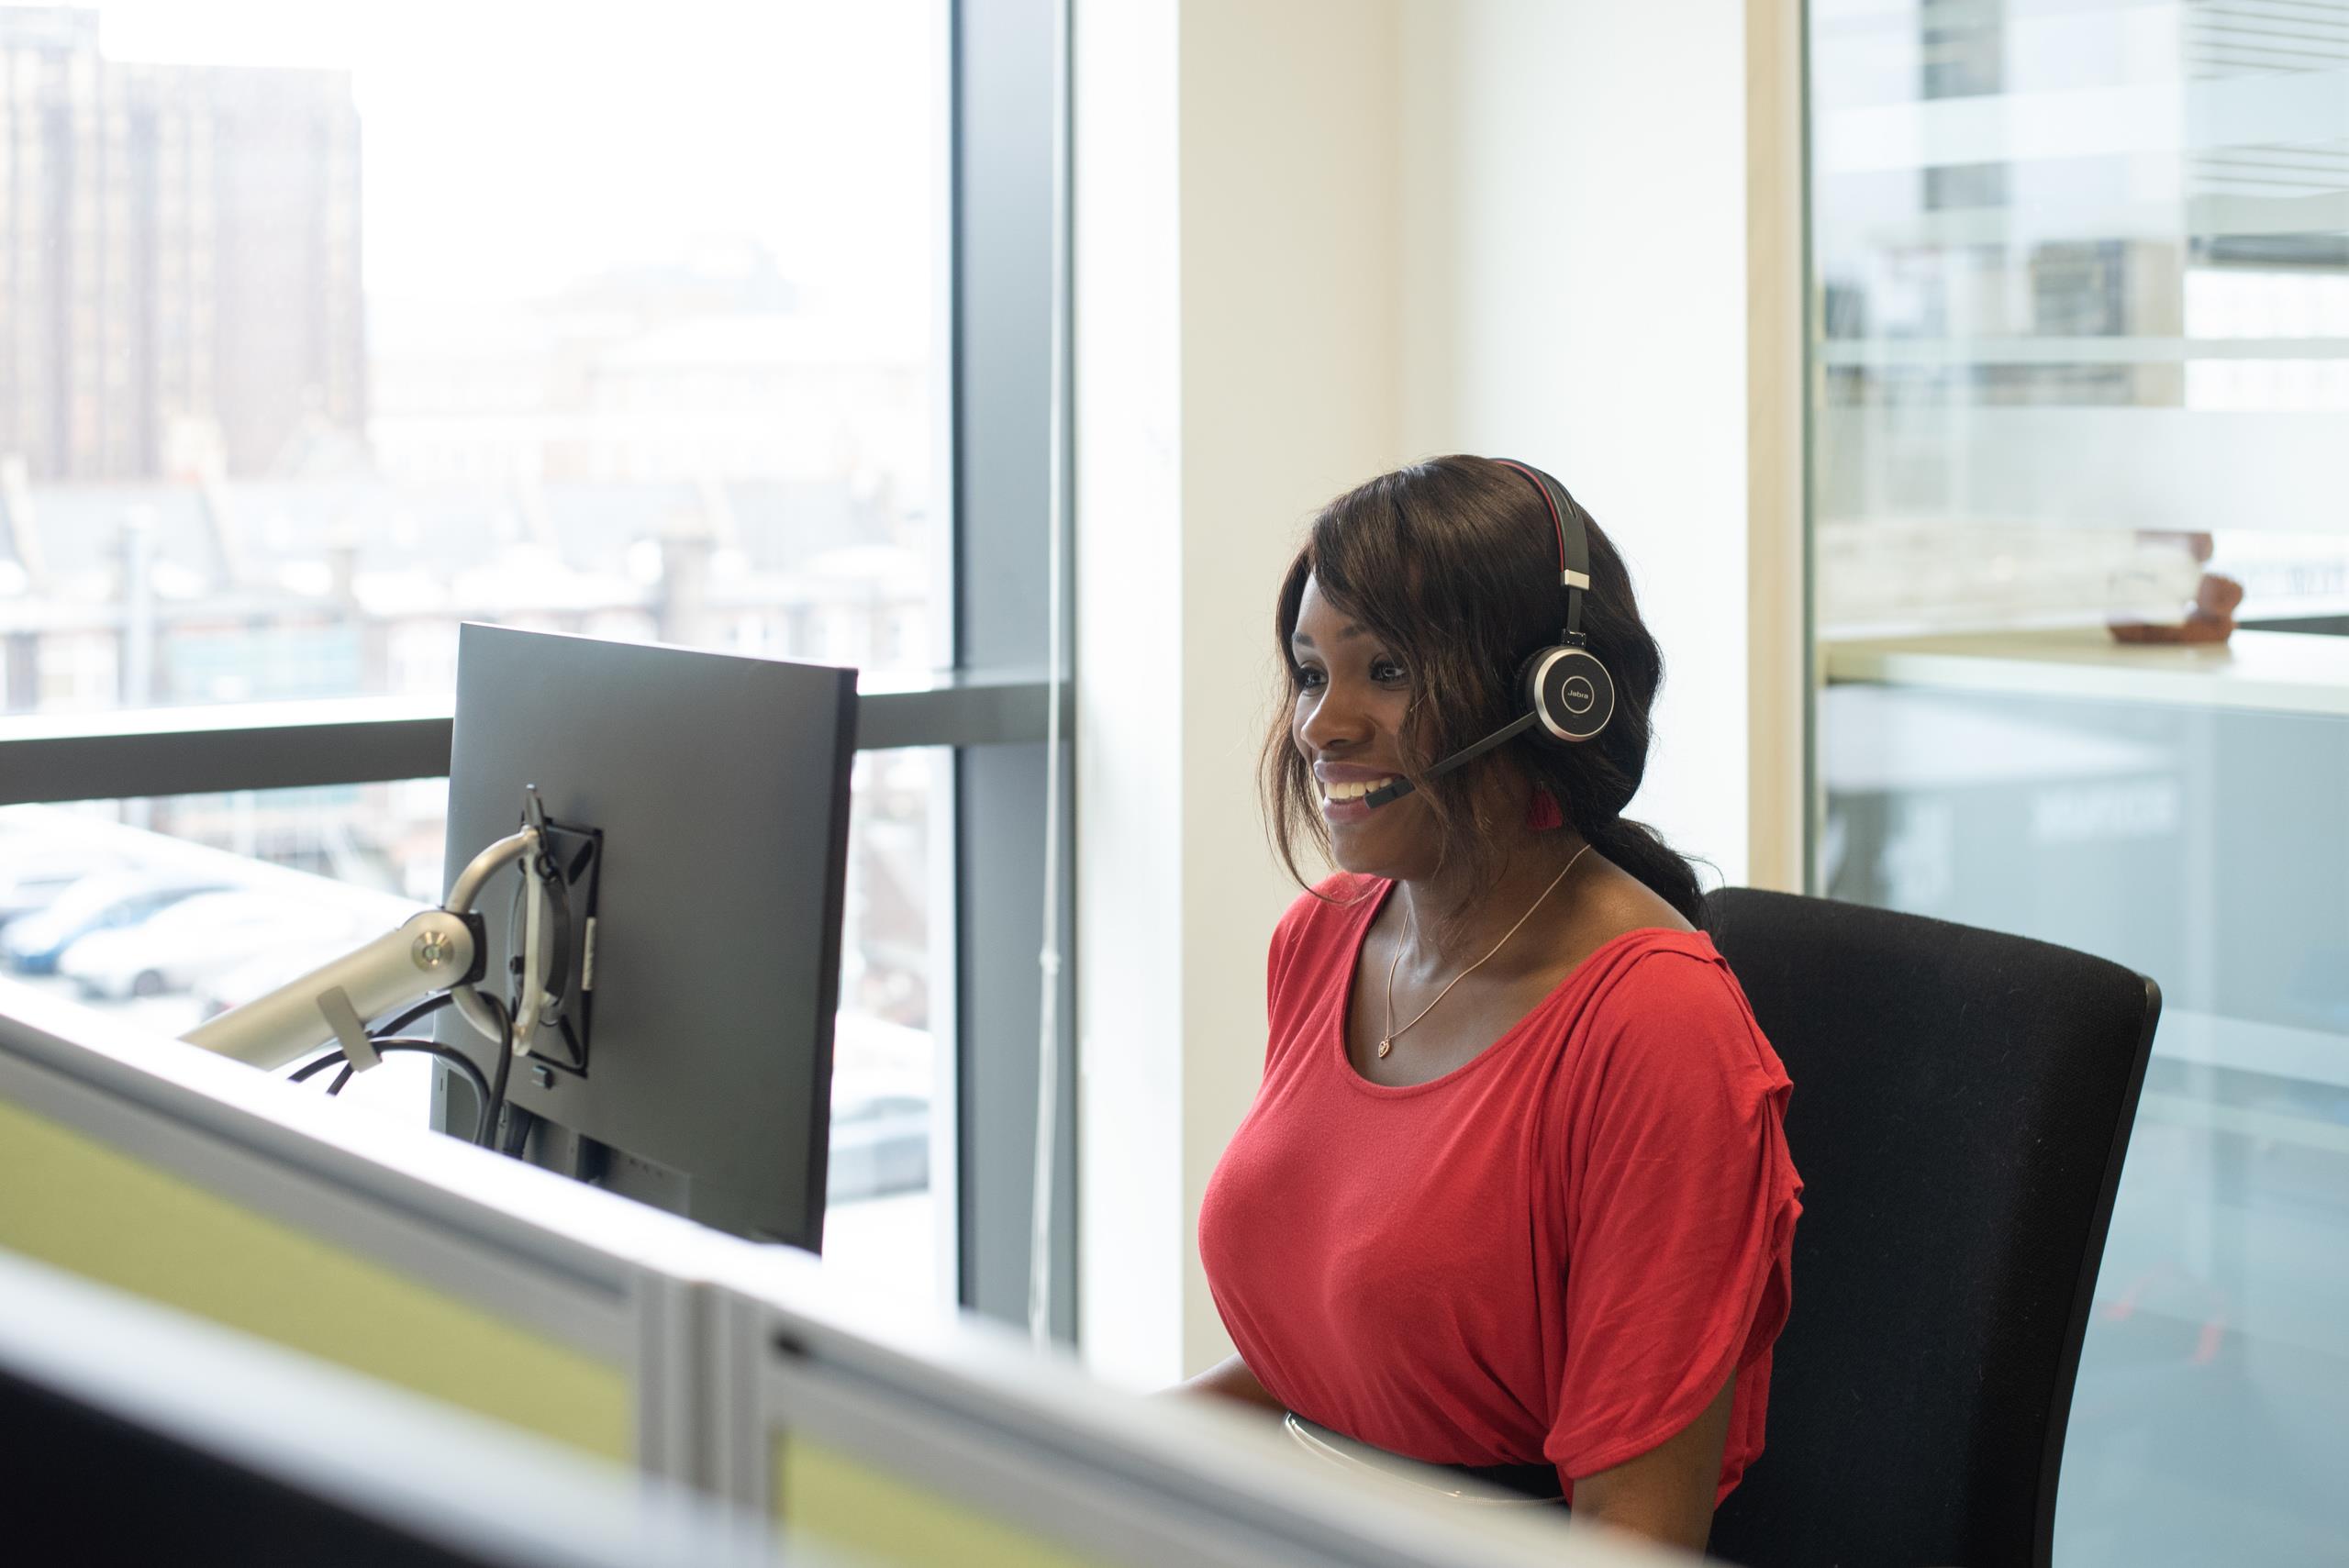 Lady using a headset and computer as part of a skype call